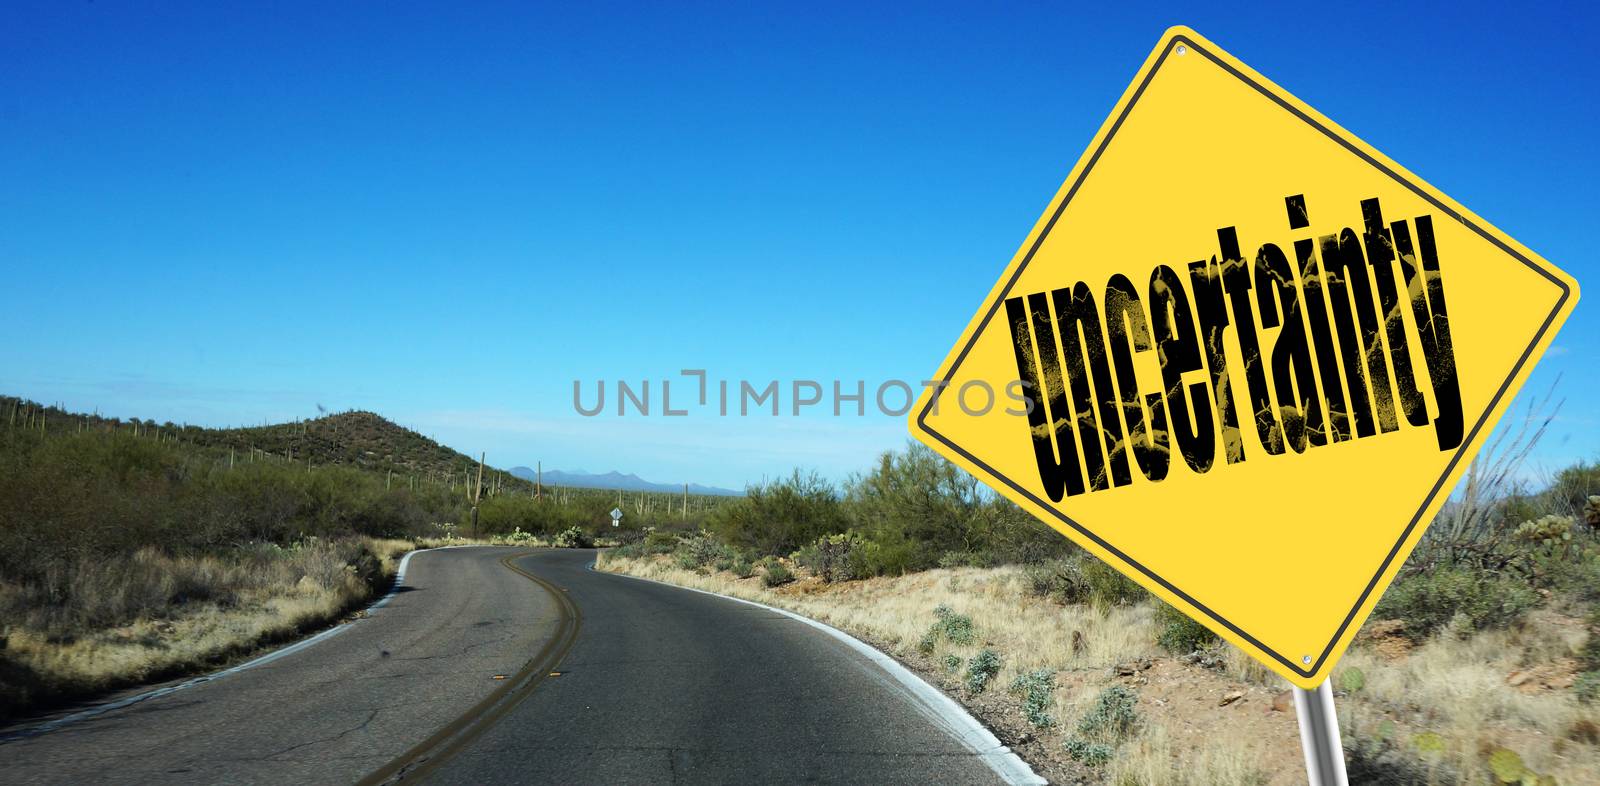 Uncertainty ahead sign on a sky background and dessert road